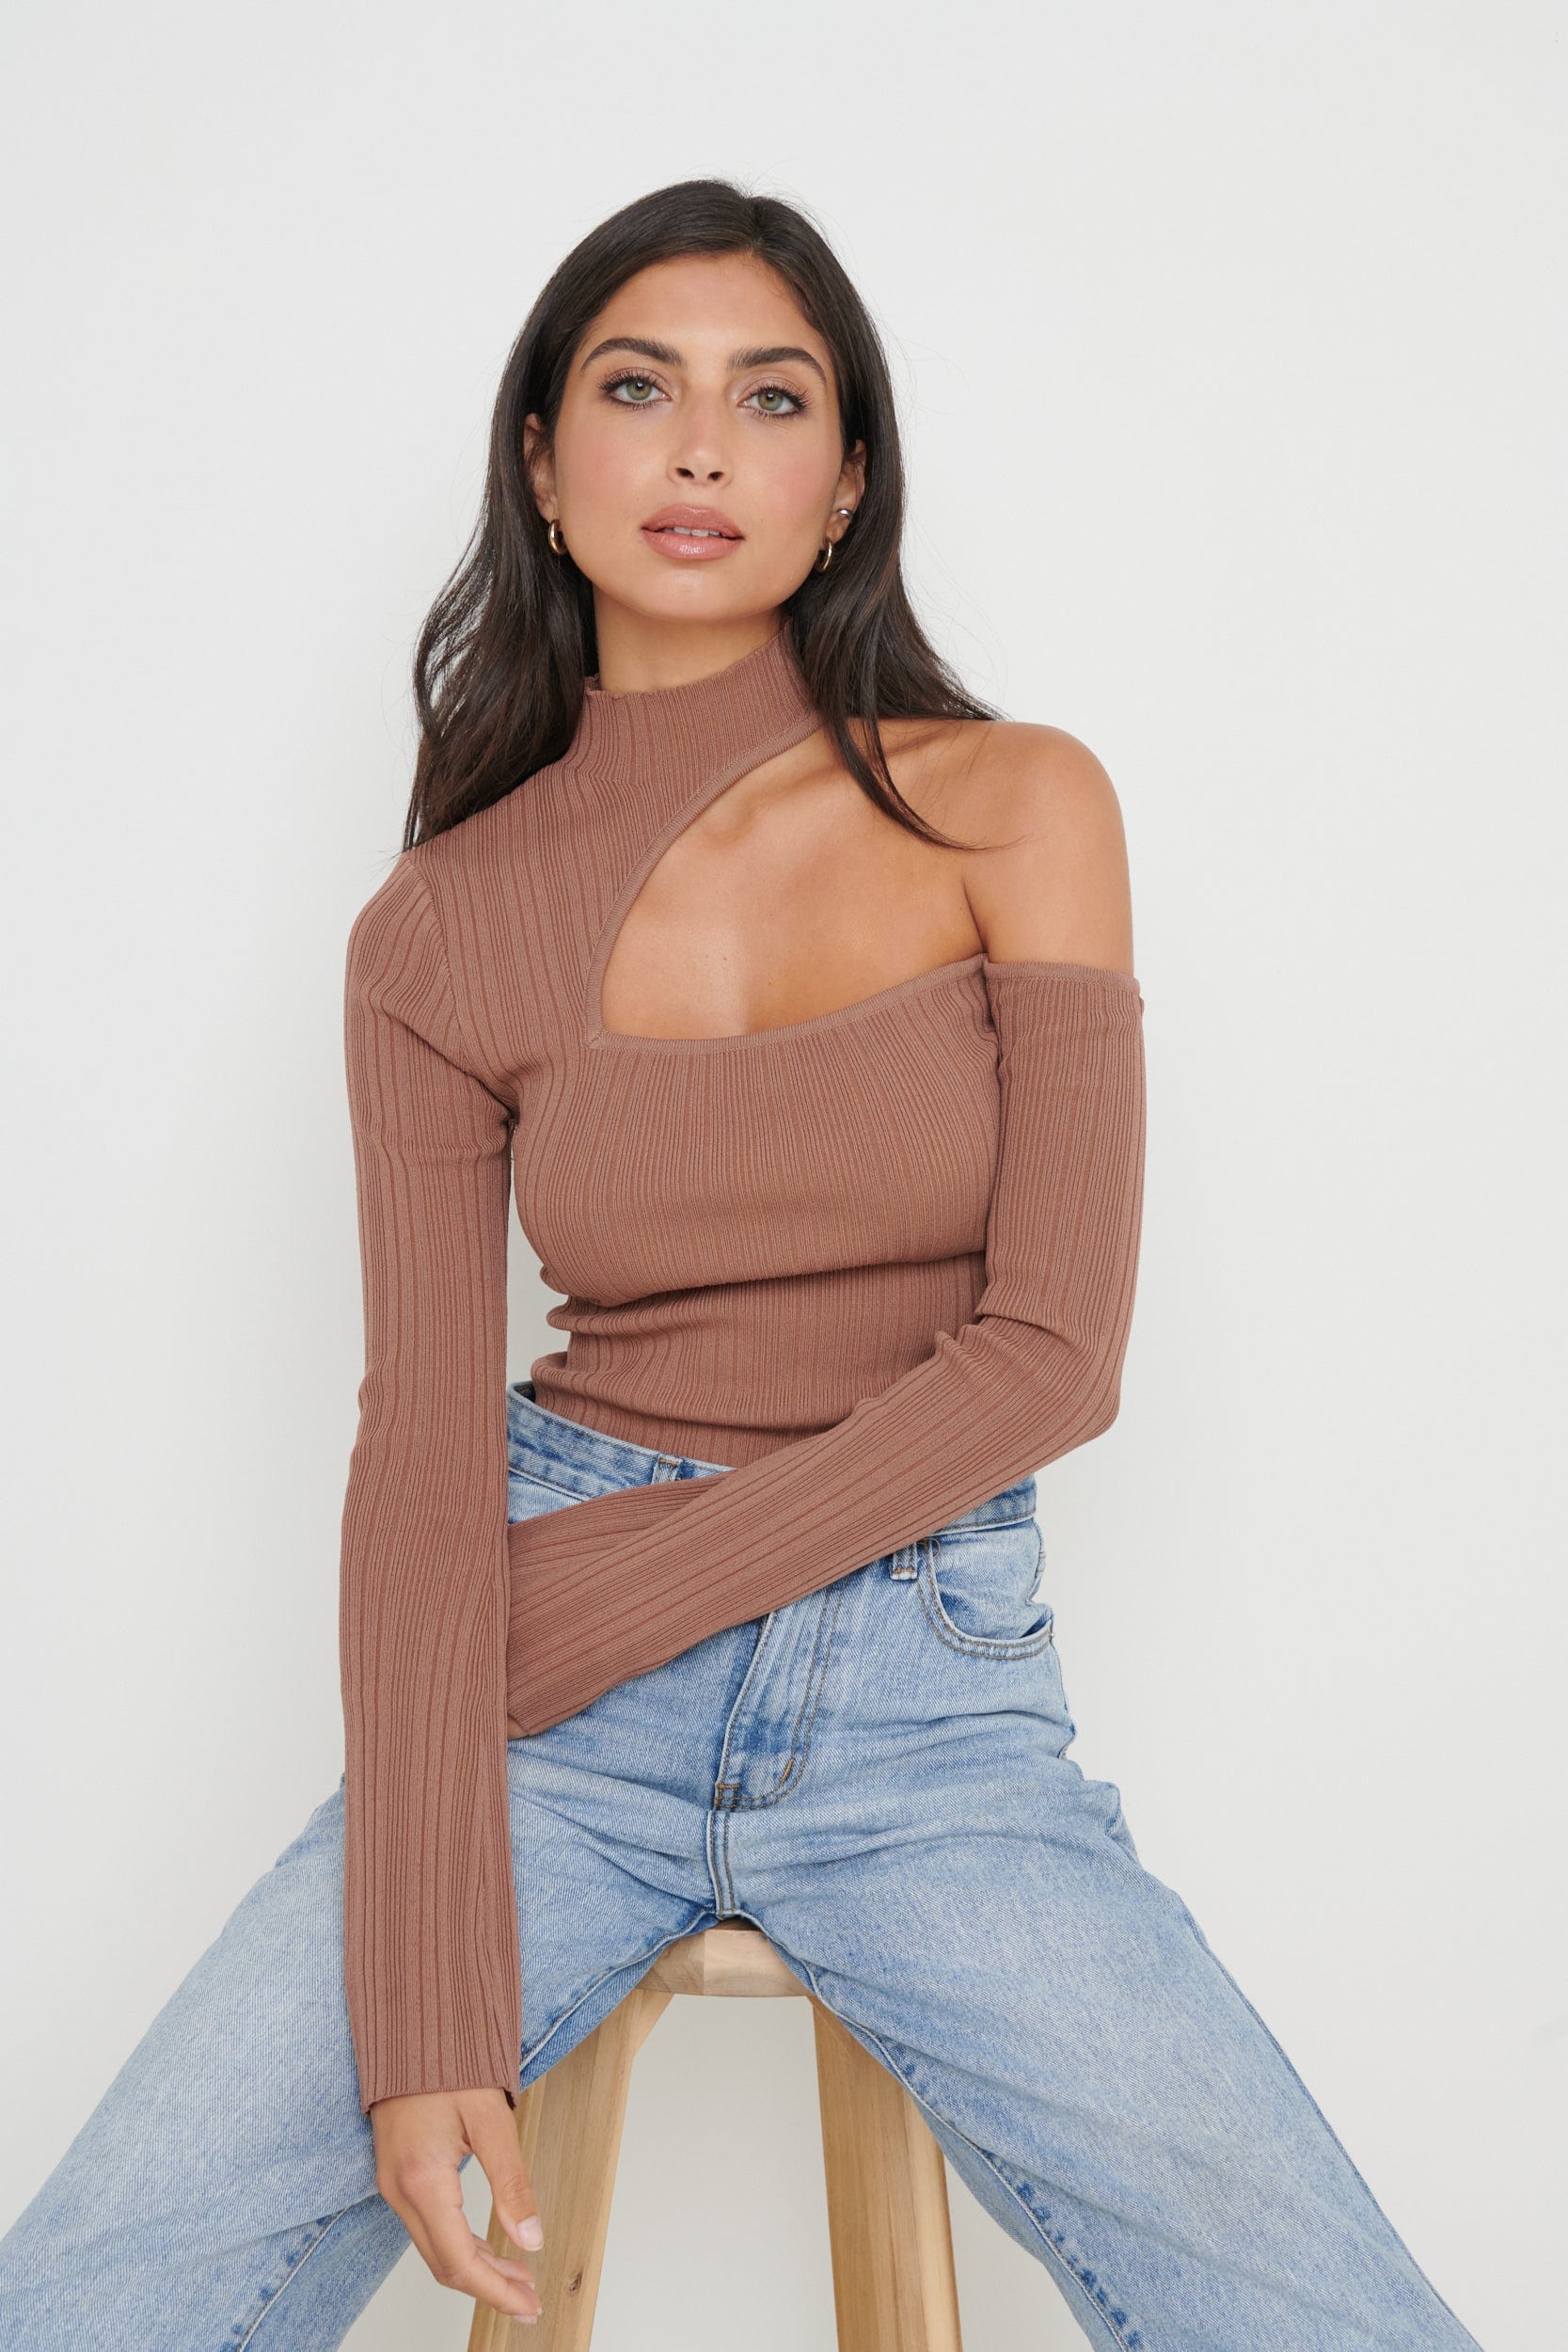 Presley High Neck Cut Out Knit Top - Chocolate Brown